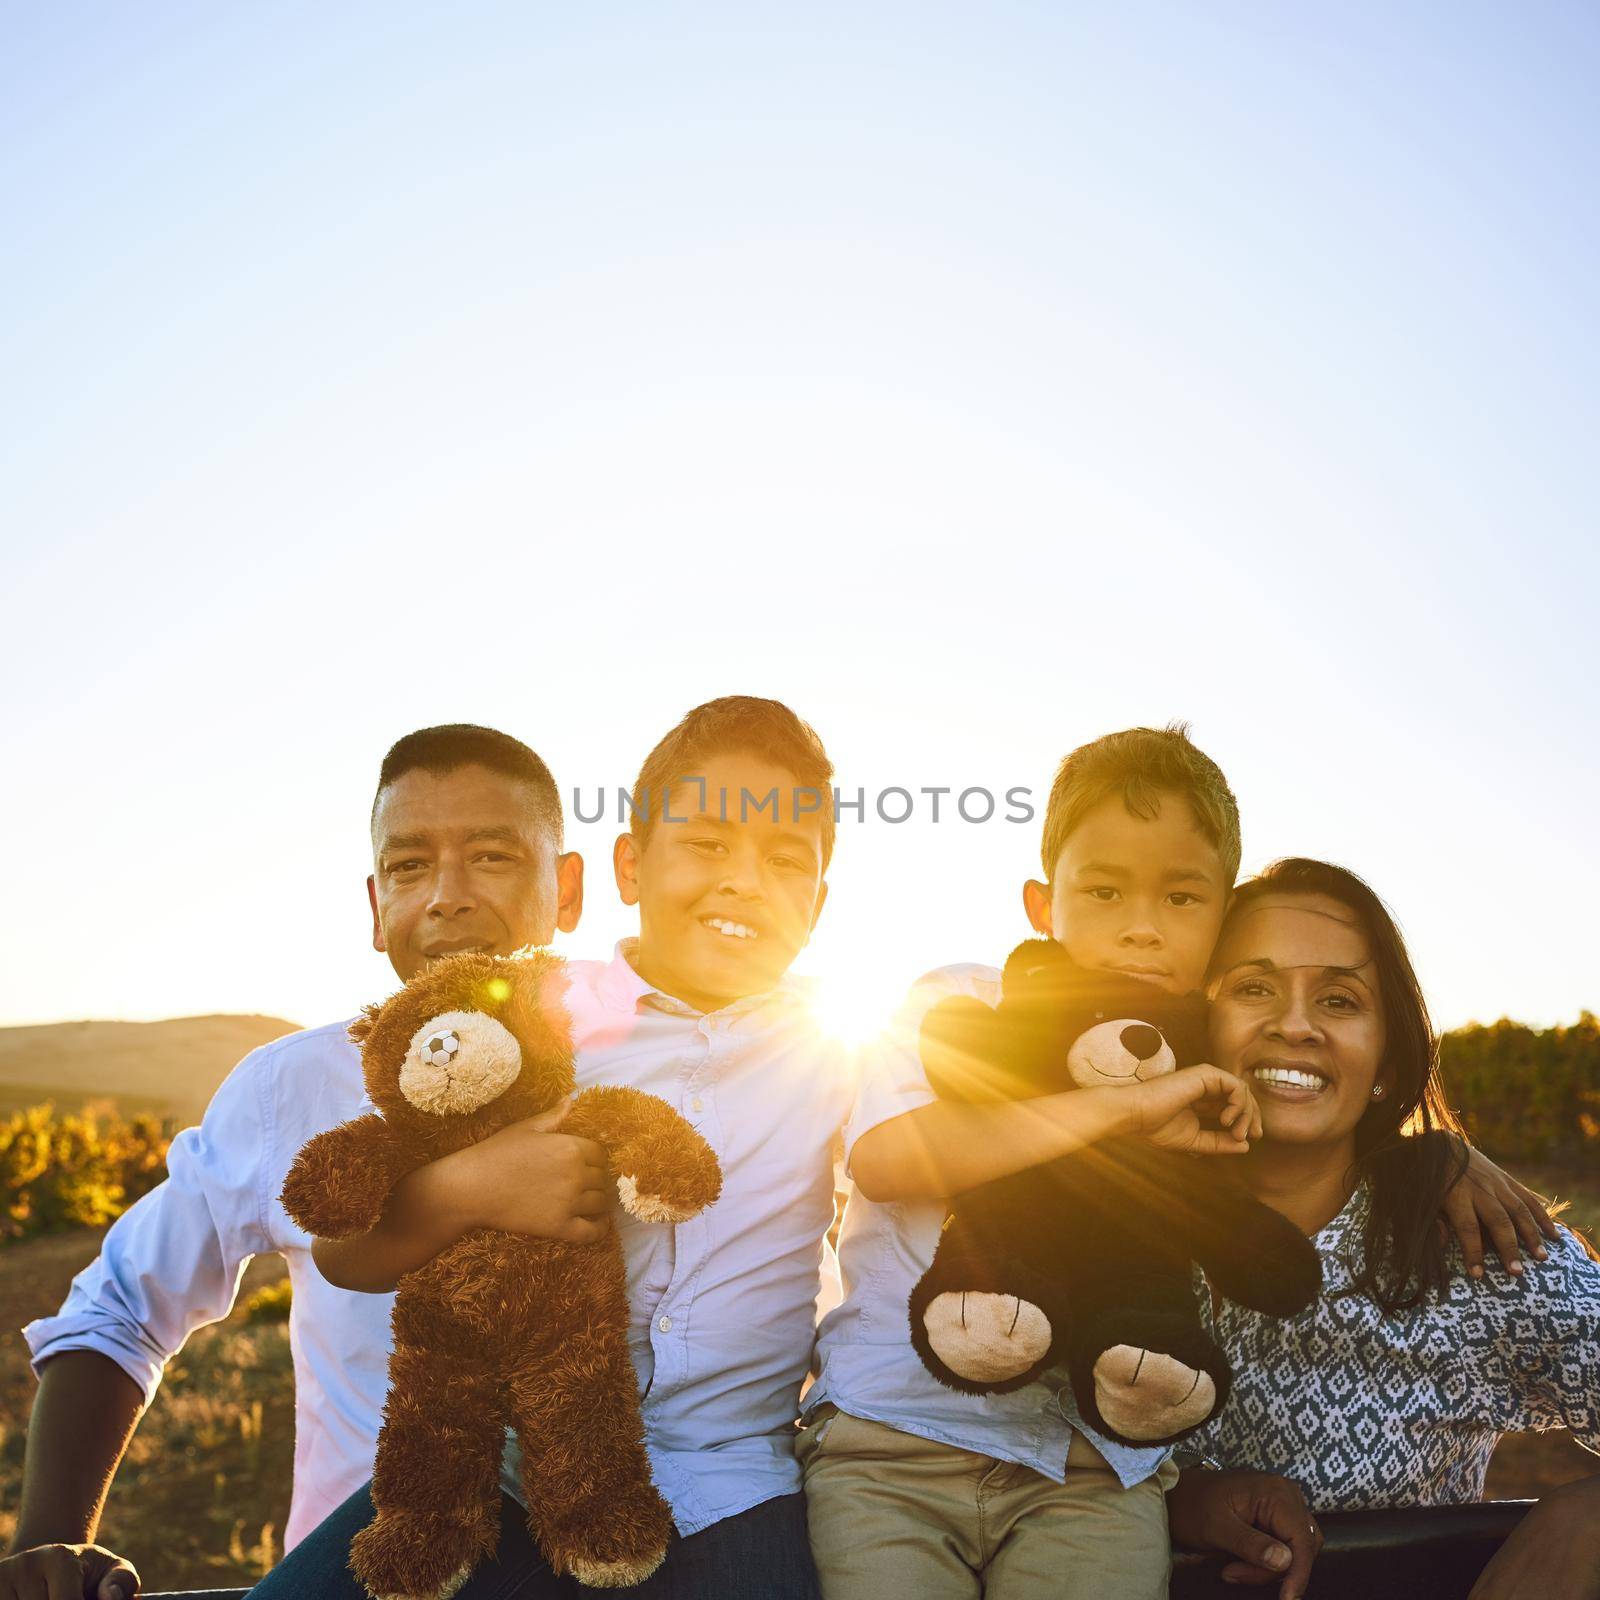 Being together is such a treasure. Portrait of a happy family bonding together outdoors